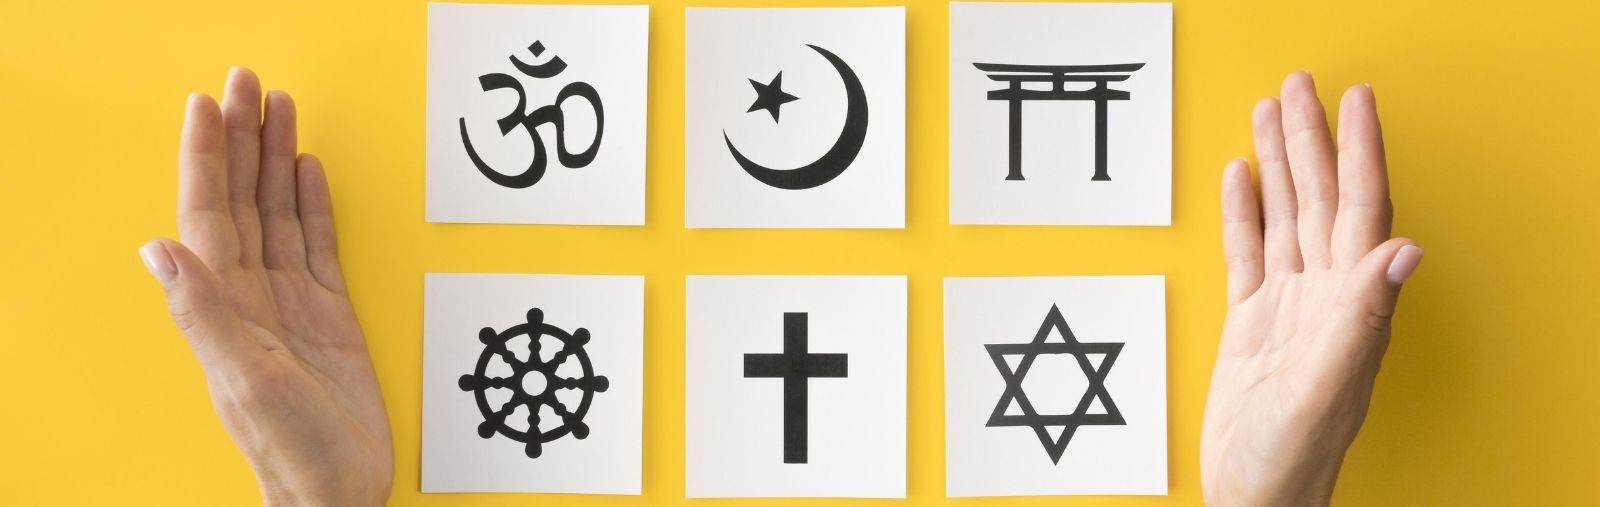 White pieces of paper with interfaith symbols on a yellow background, between two open hands